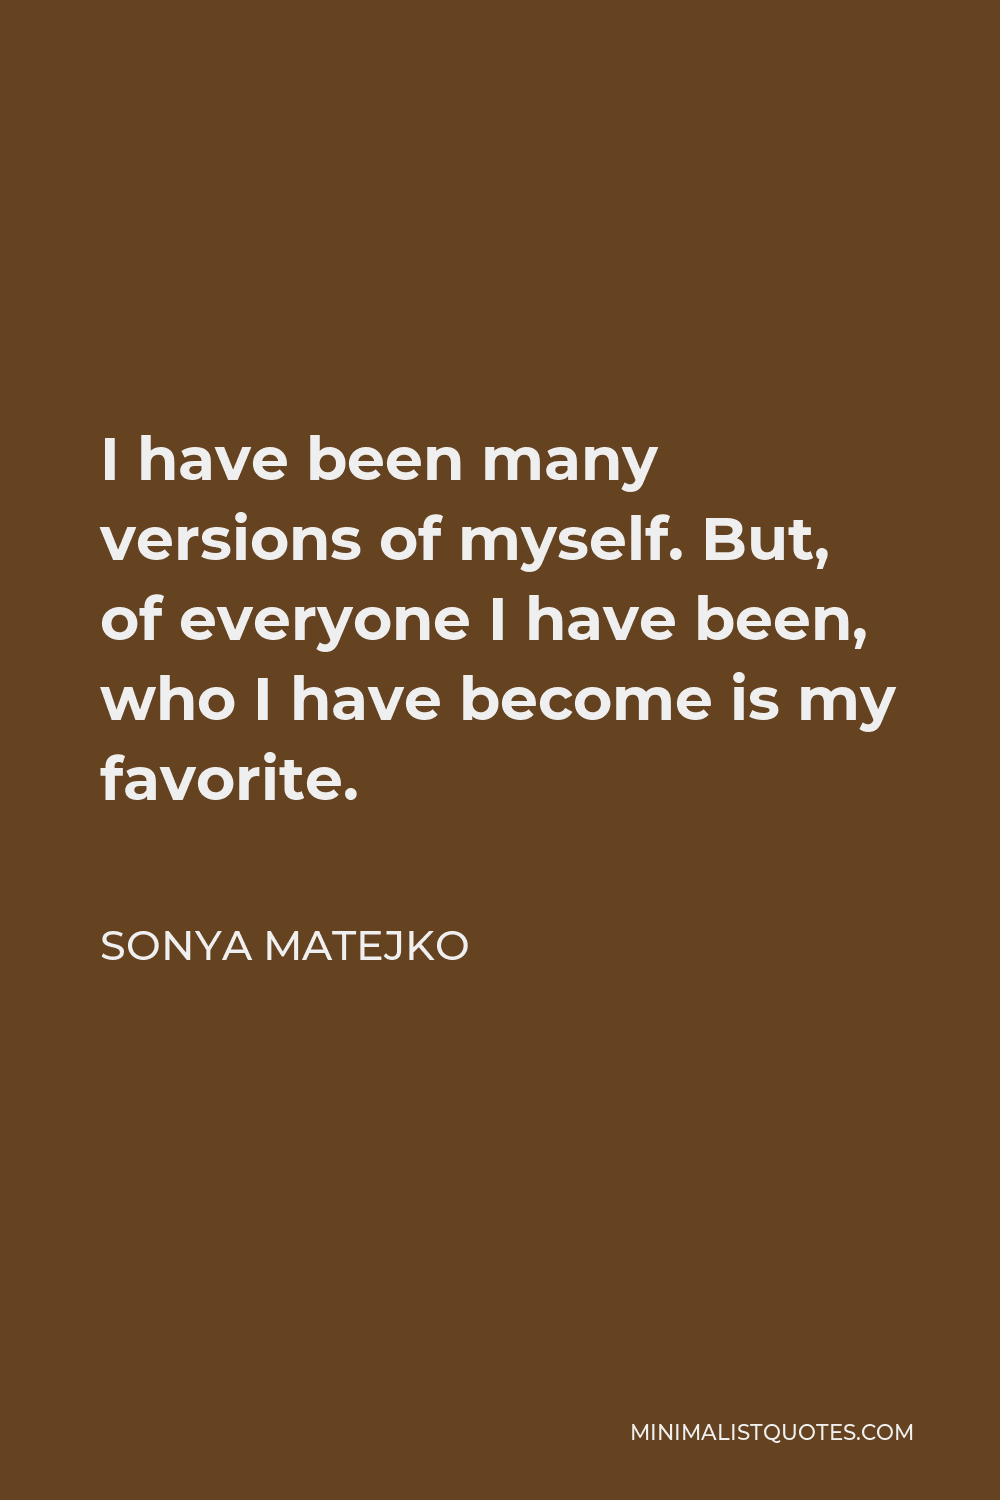 Sonya Matejko Quote - I have been many versions of myself. But, of everyone I have been, who I have become is my favorite.